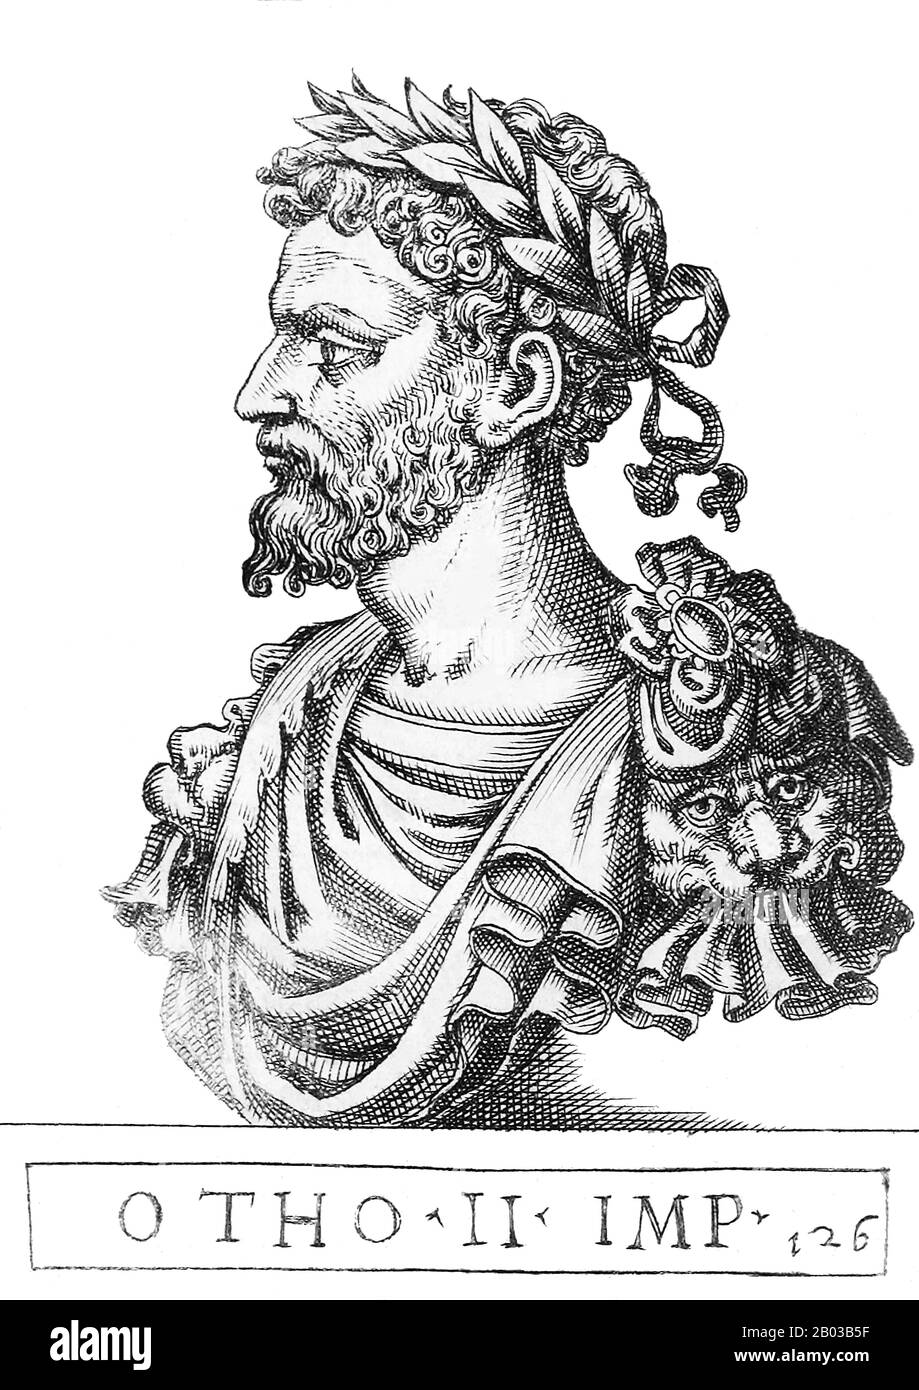 Otto II (955-983), also known as Otto the Red, was the youngest and sole surviving son of Emperor Otto the Great. He was made co-ruler of Germany in 961, and later named co-emperor in 967. His father arranged for him to marry the Byzantine Princess Theophanu, to engender better relations with the Byzantine Empire. After his father died in 973, Otto became Holy Roman Emperor in a peaceful succession. Stock Photo